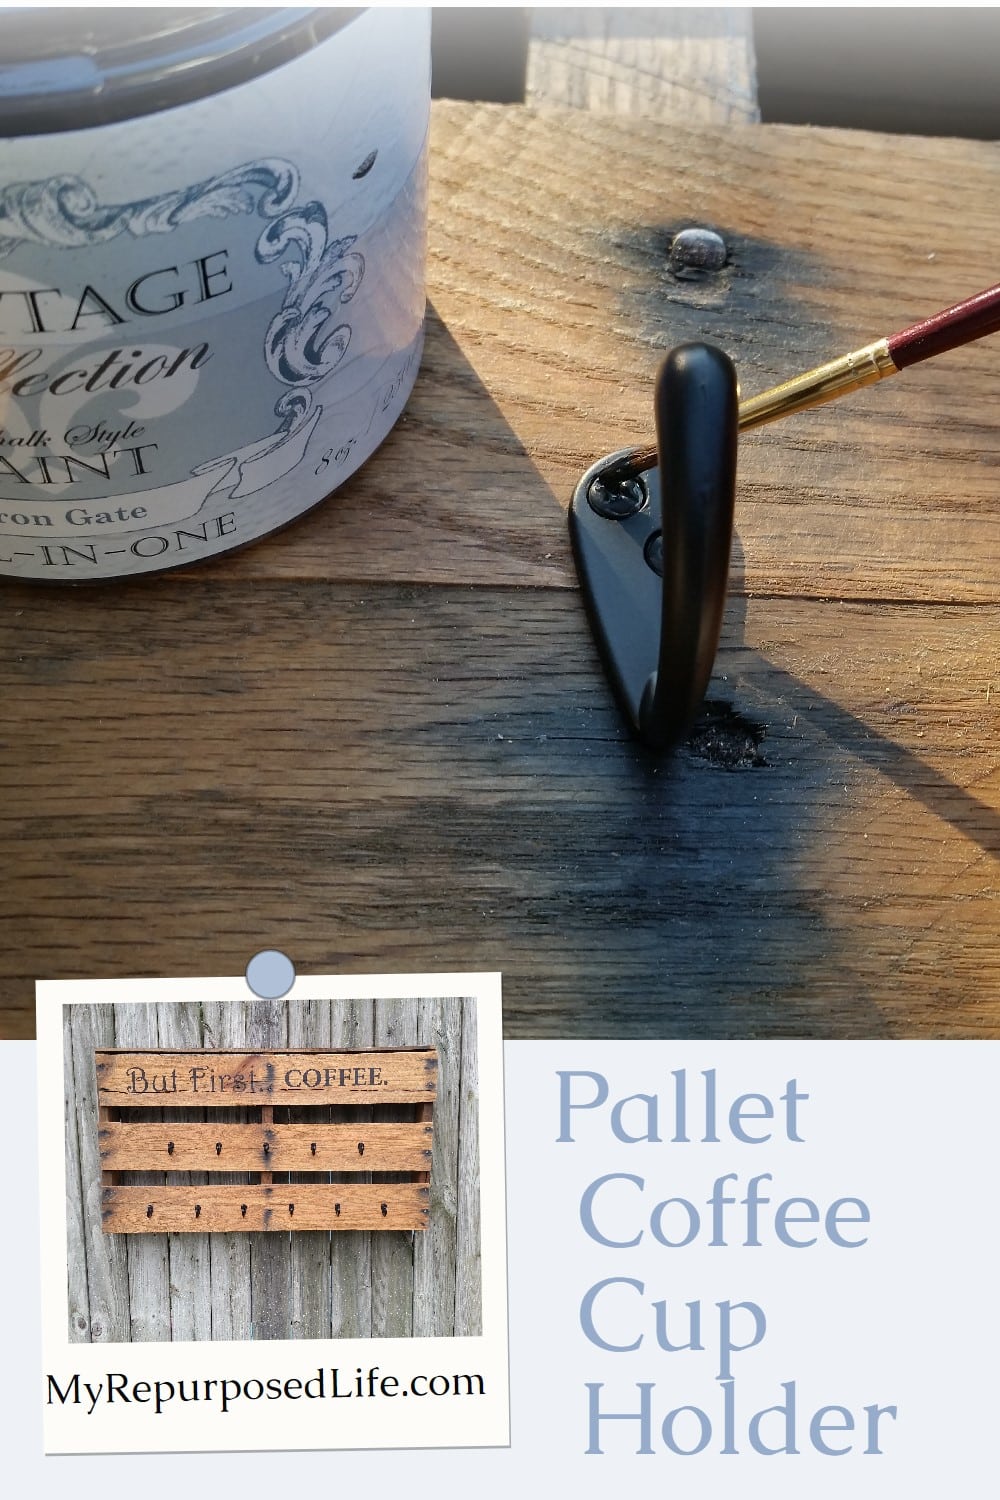 Easy Half Pallet Coffee Cup Rack to hang coffee cups in your kitchen. Popular saying: But First. Coffee stenciled. Eleven hooks for coffee cups. #MyRepurposedLife #upcycled #repurposed #pallet #cuprack via @repurposedlife